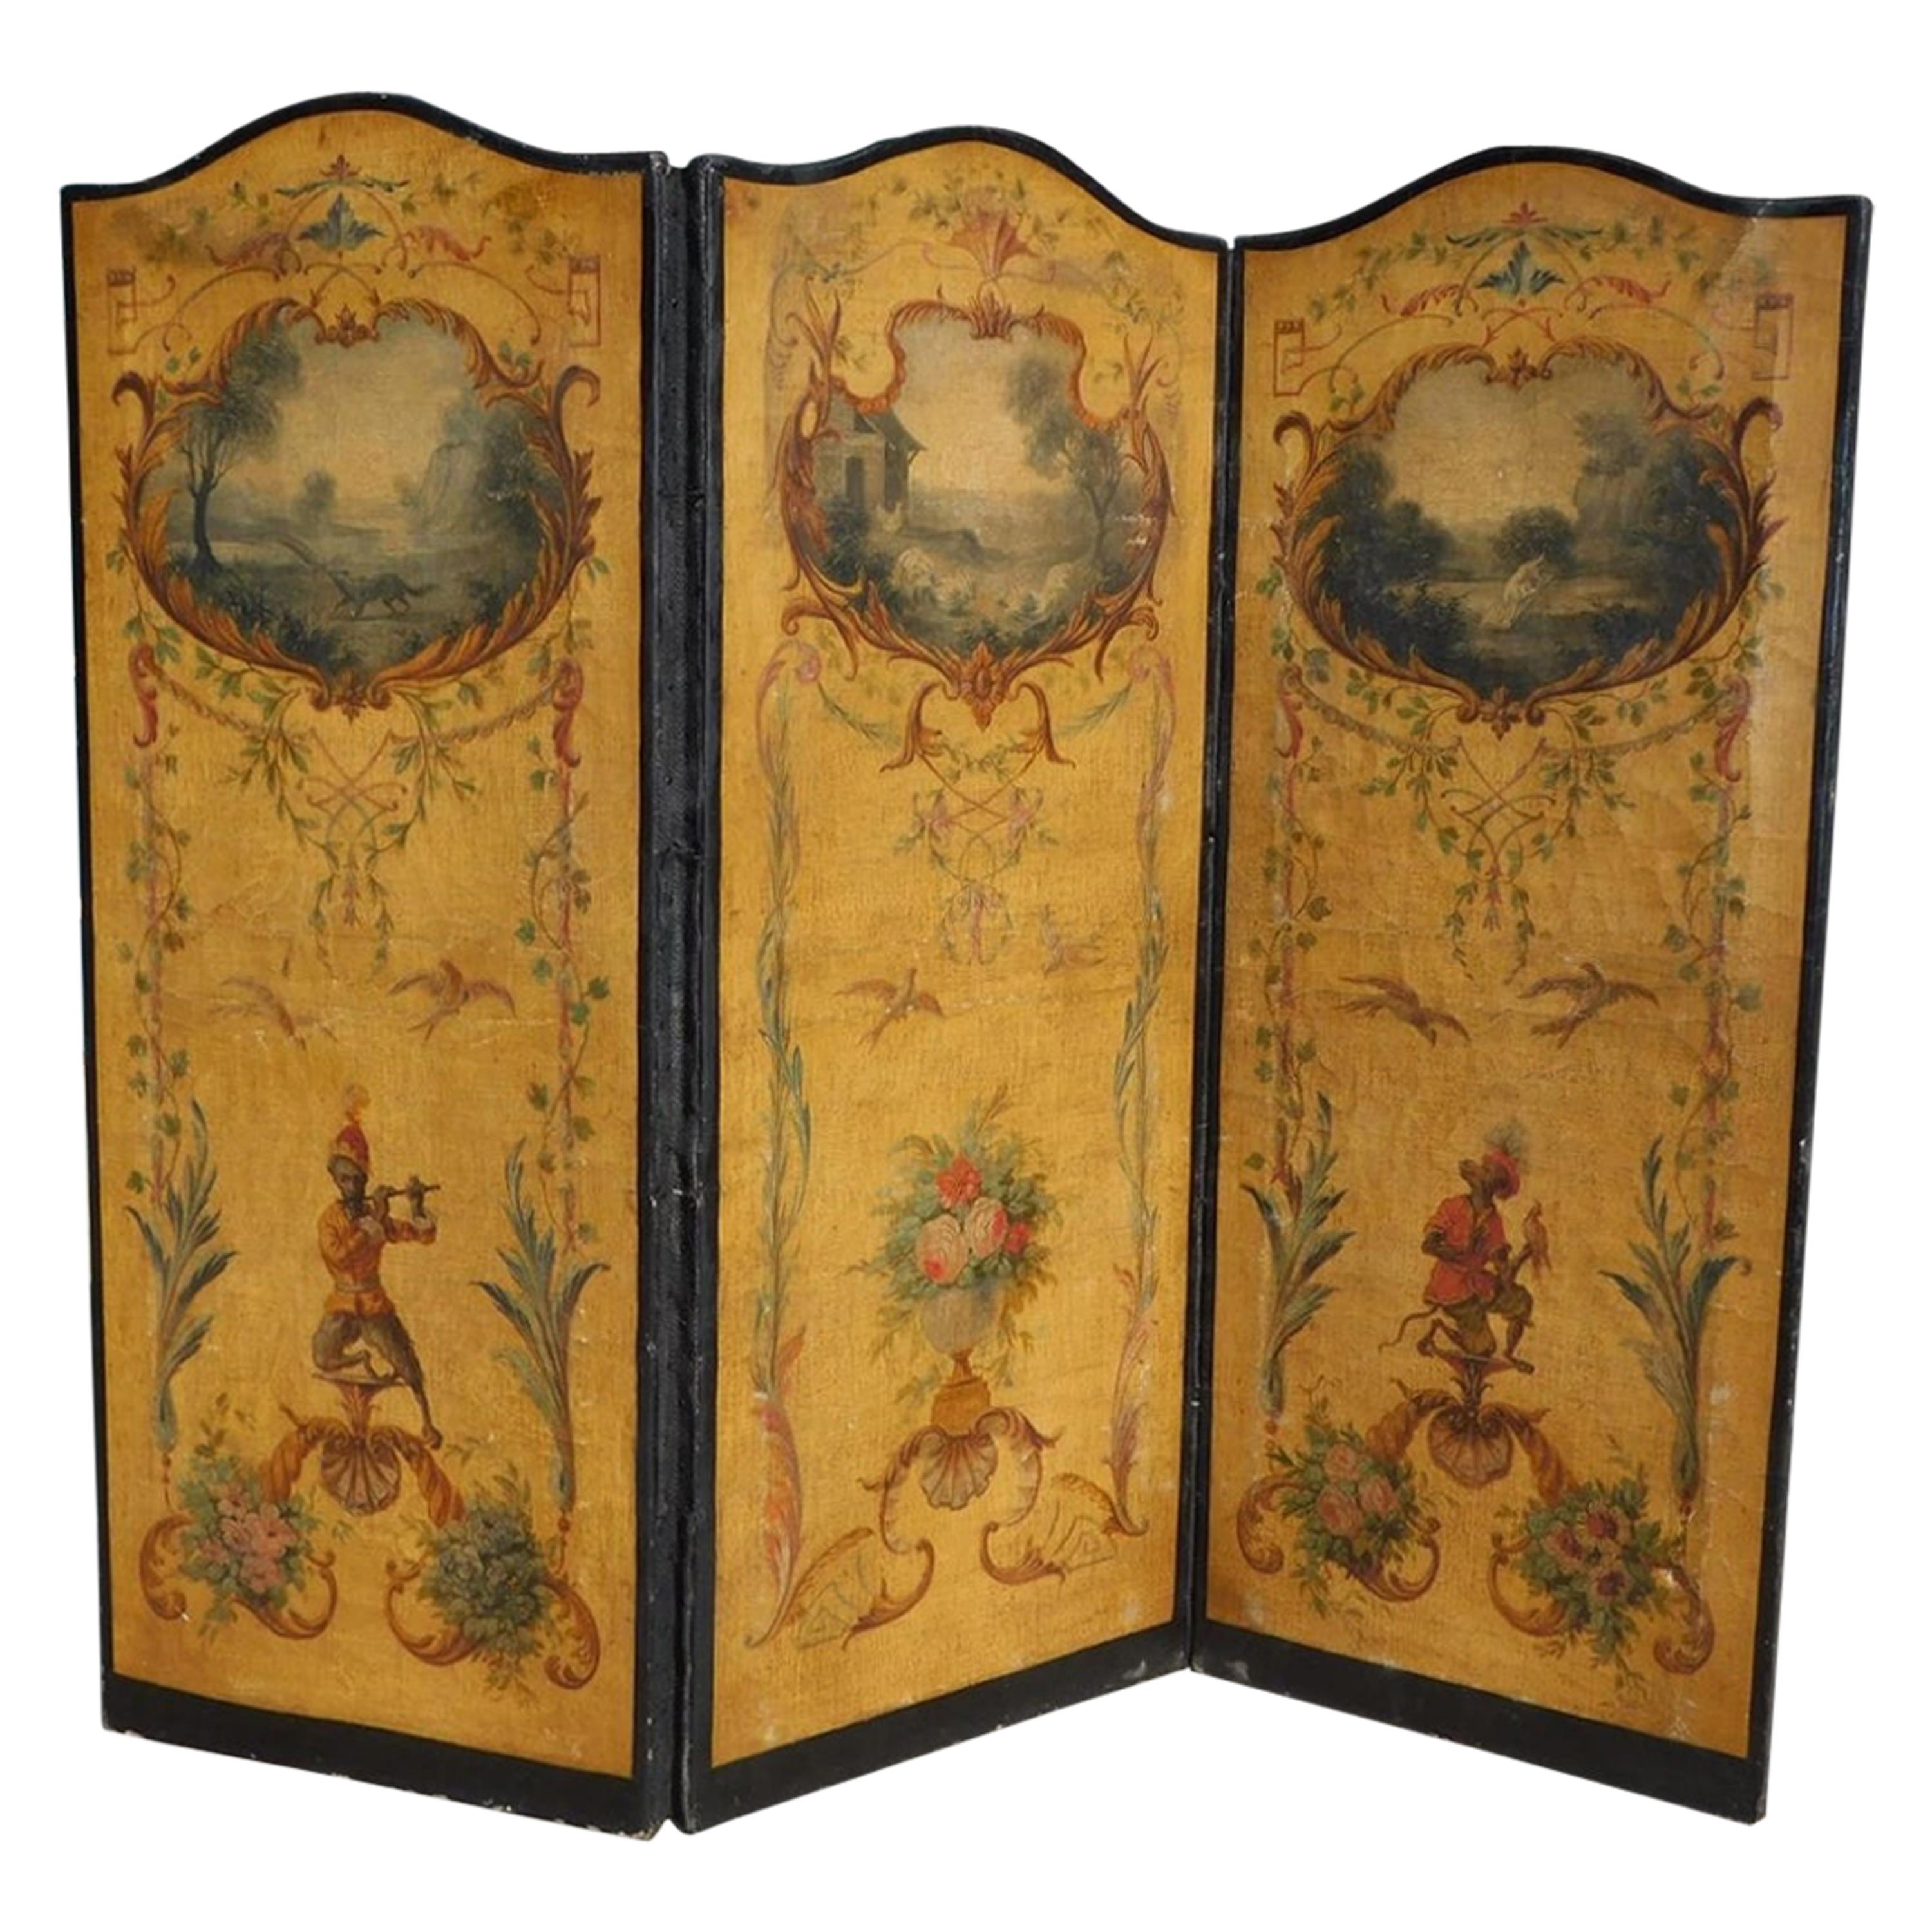 French Three Panel Decorative Painted Canvas Screen with Musical Monkeys C. 1830